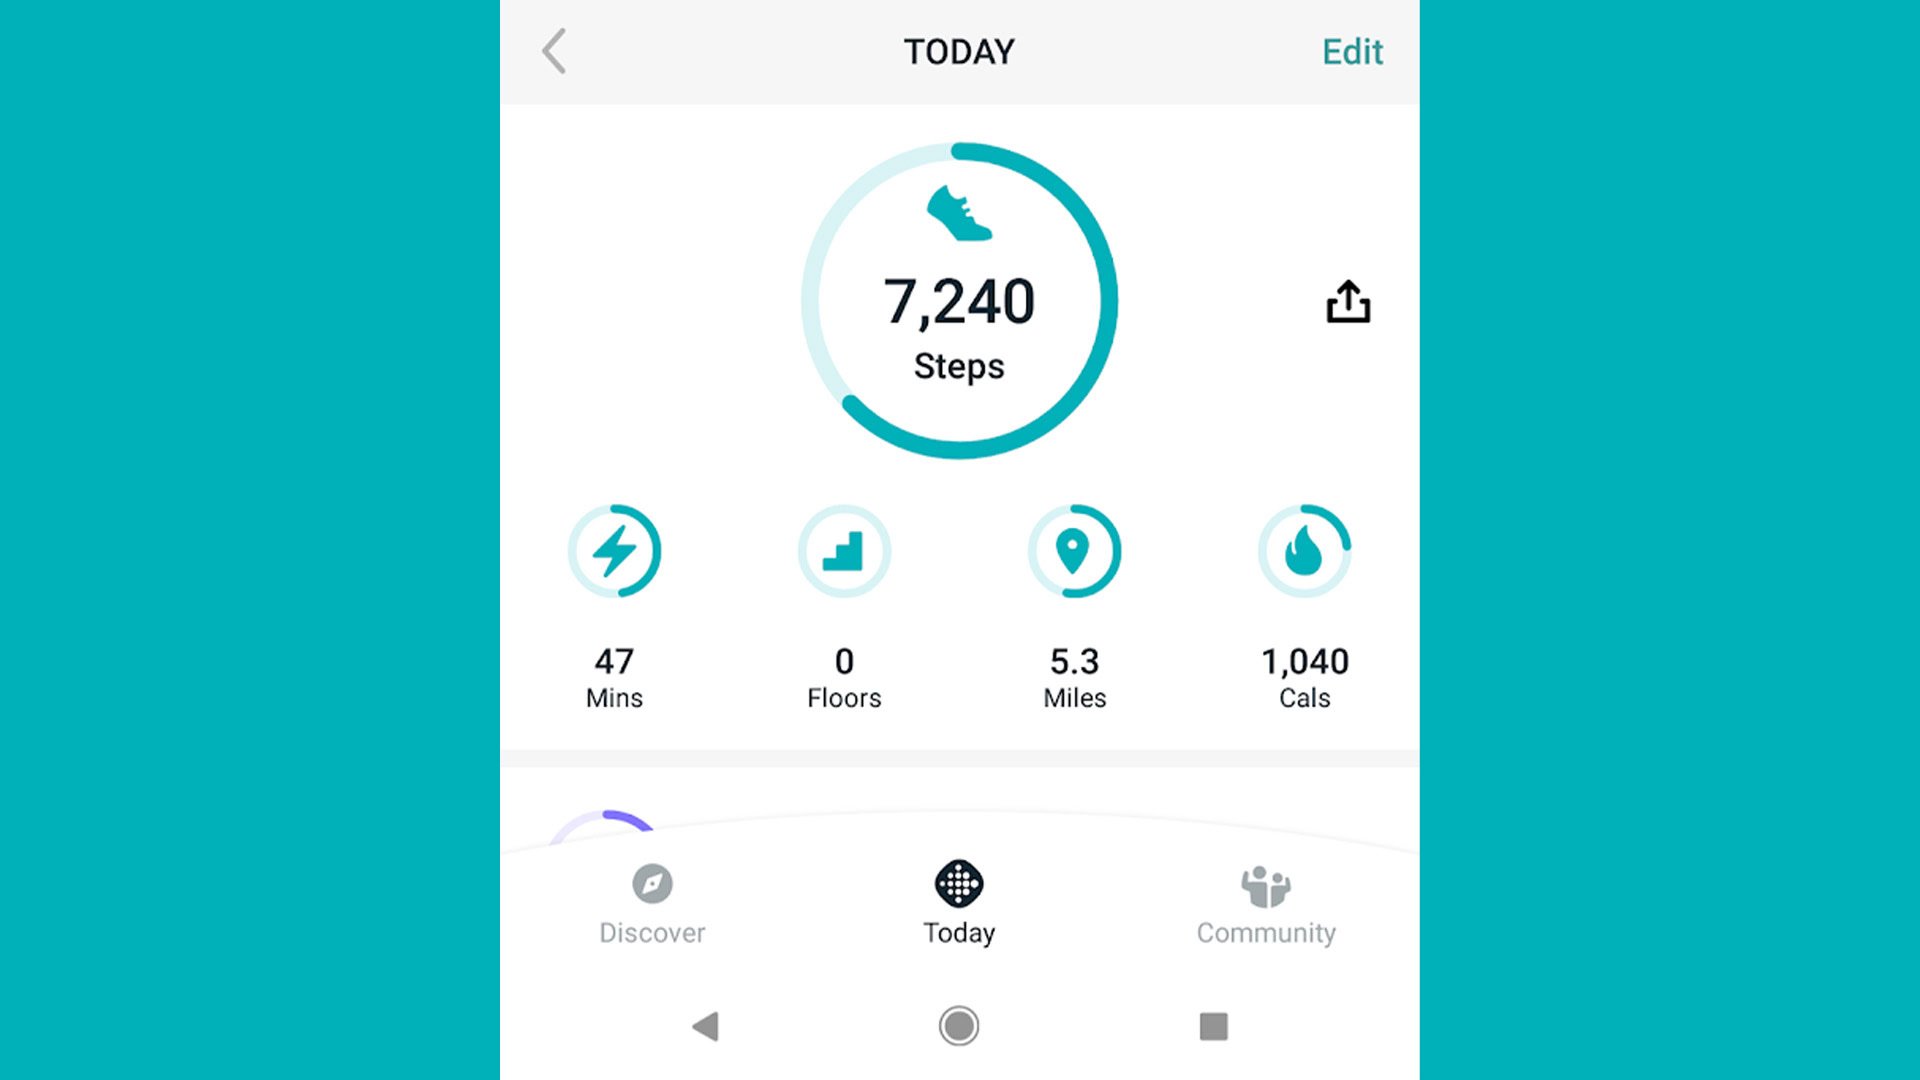 Fitbit best pedometer apps and step counter apps for Android